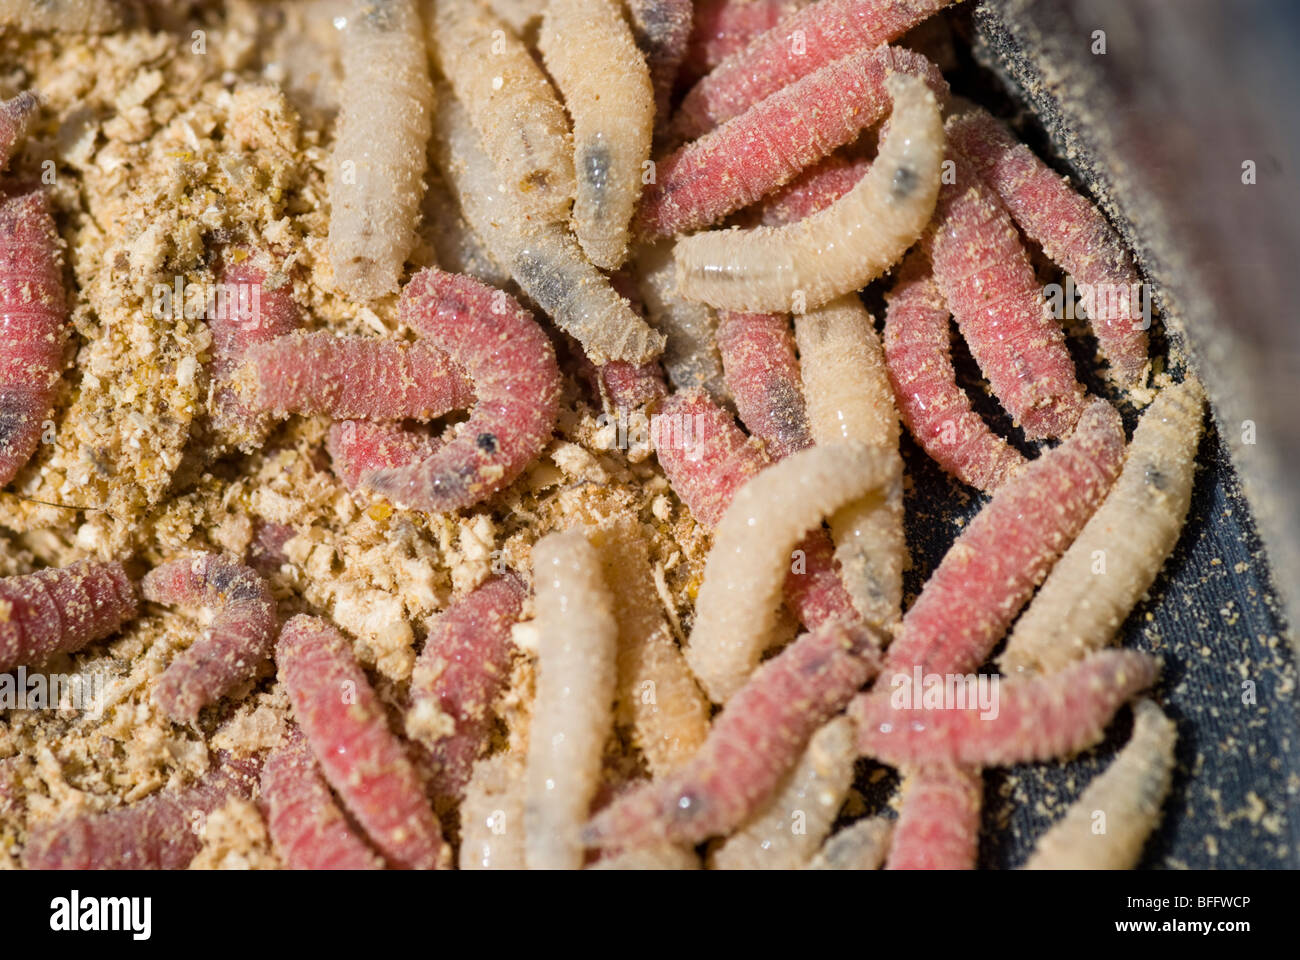 https://c8.alamy.com/comp/BFFWCP/various-coloured-maggots-used-for-fishing-bait-in-a-black-round-plastic-BFFWCP.jpg